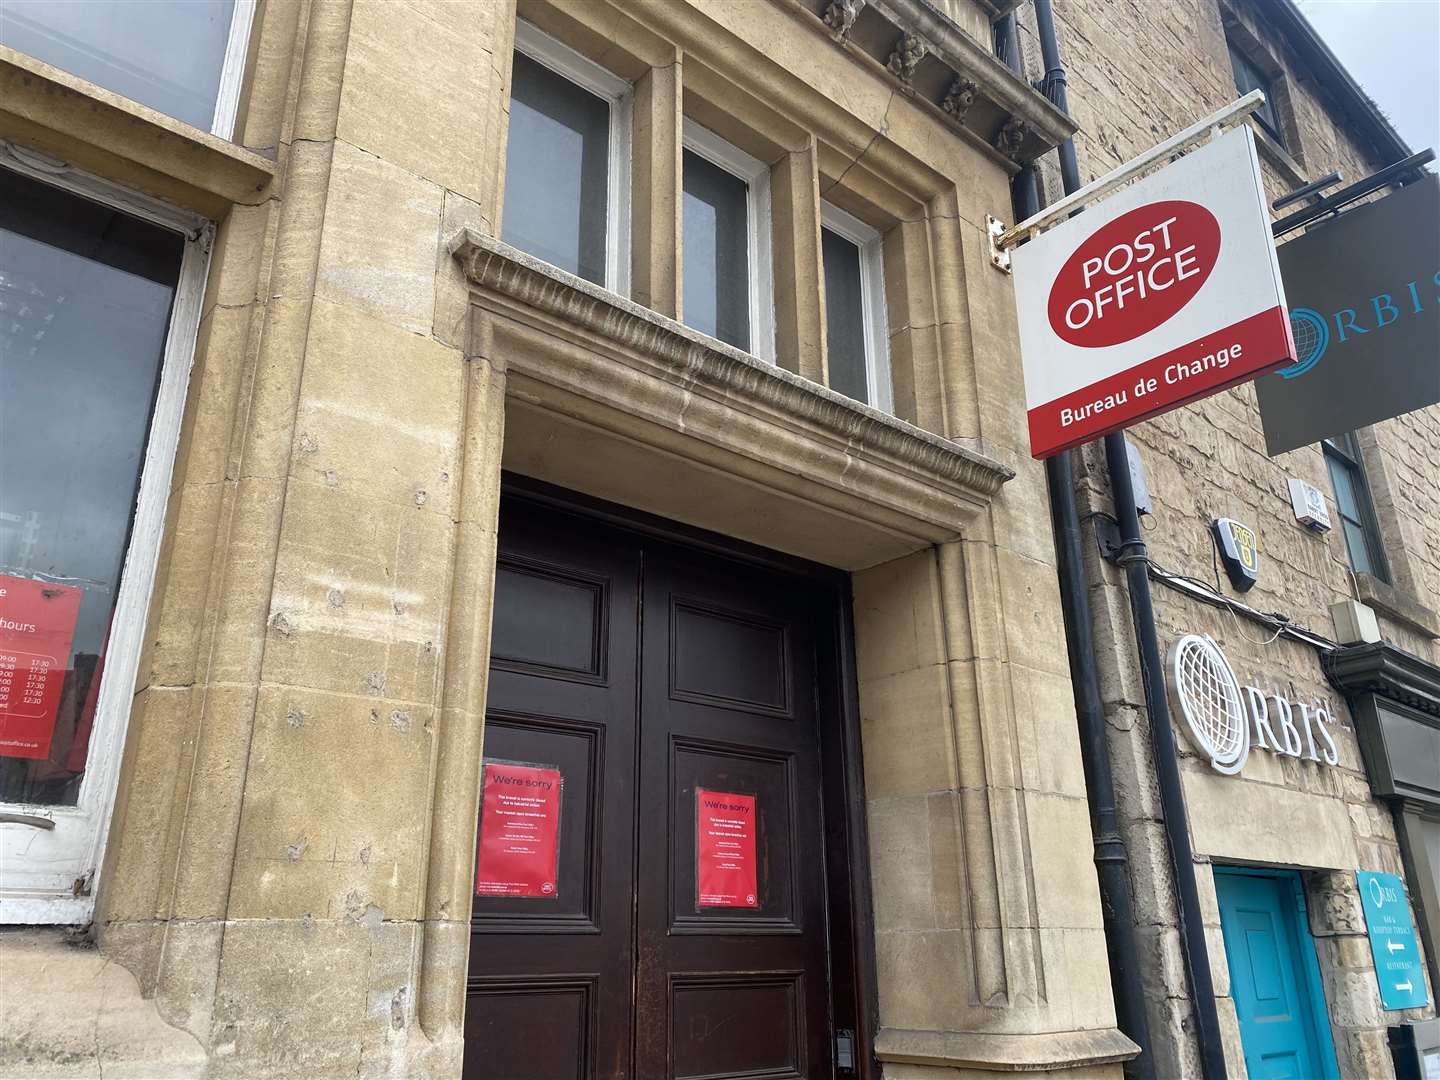 Branches owned and run by the Post Office will close on Monday